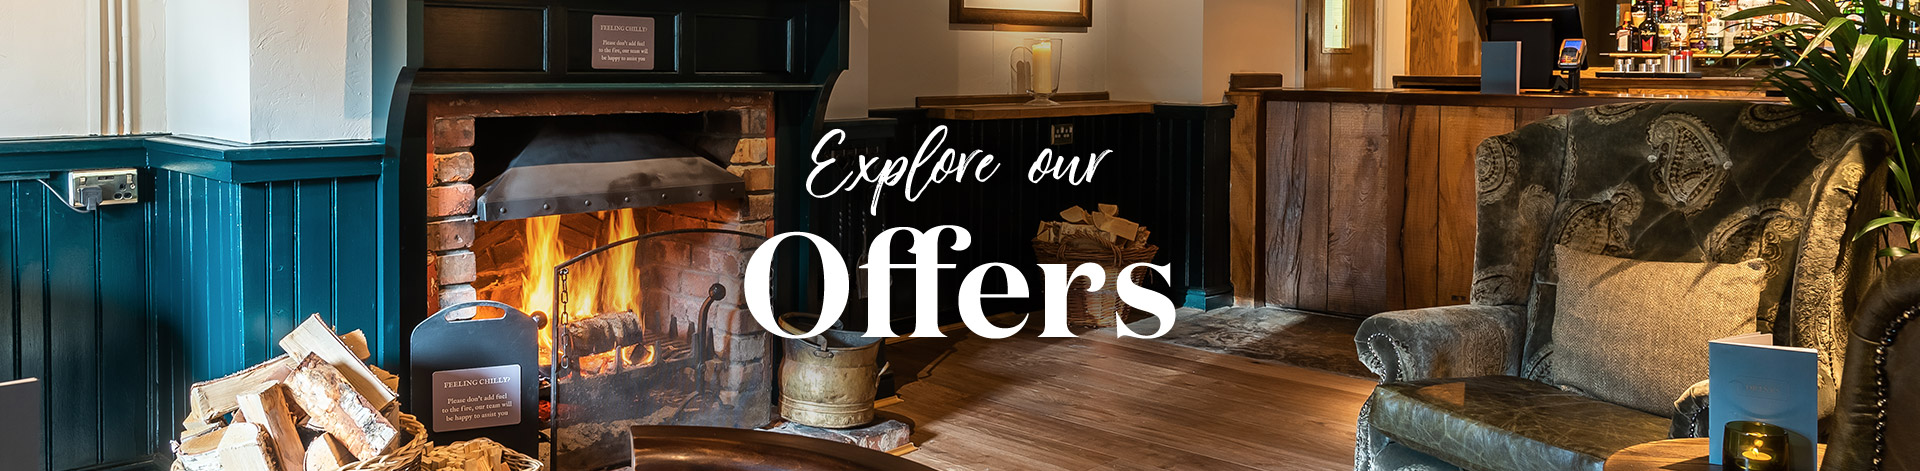 Our latest offers at The Three Legged Cross